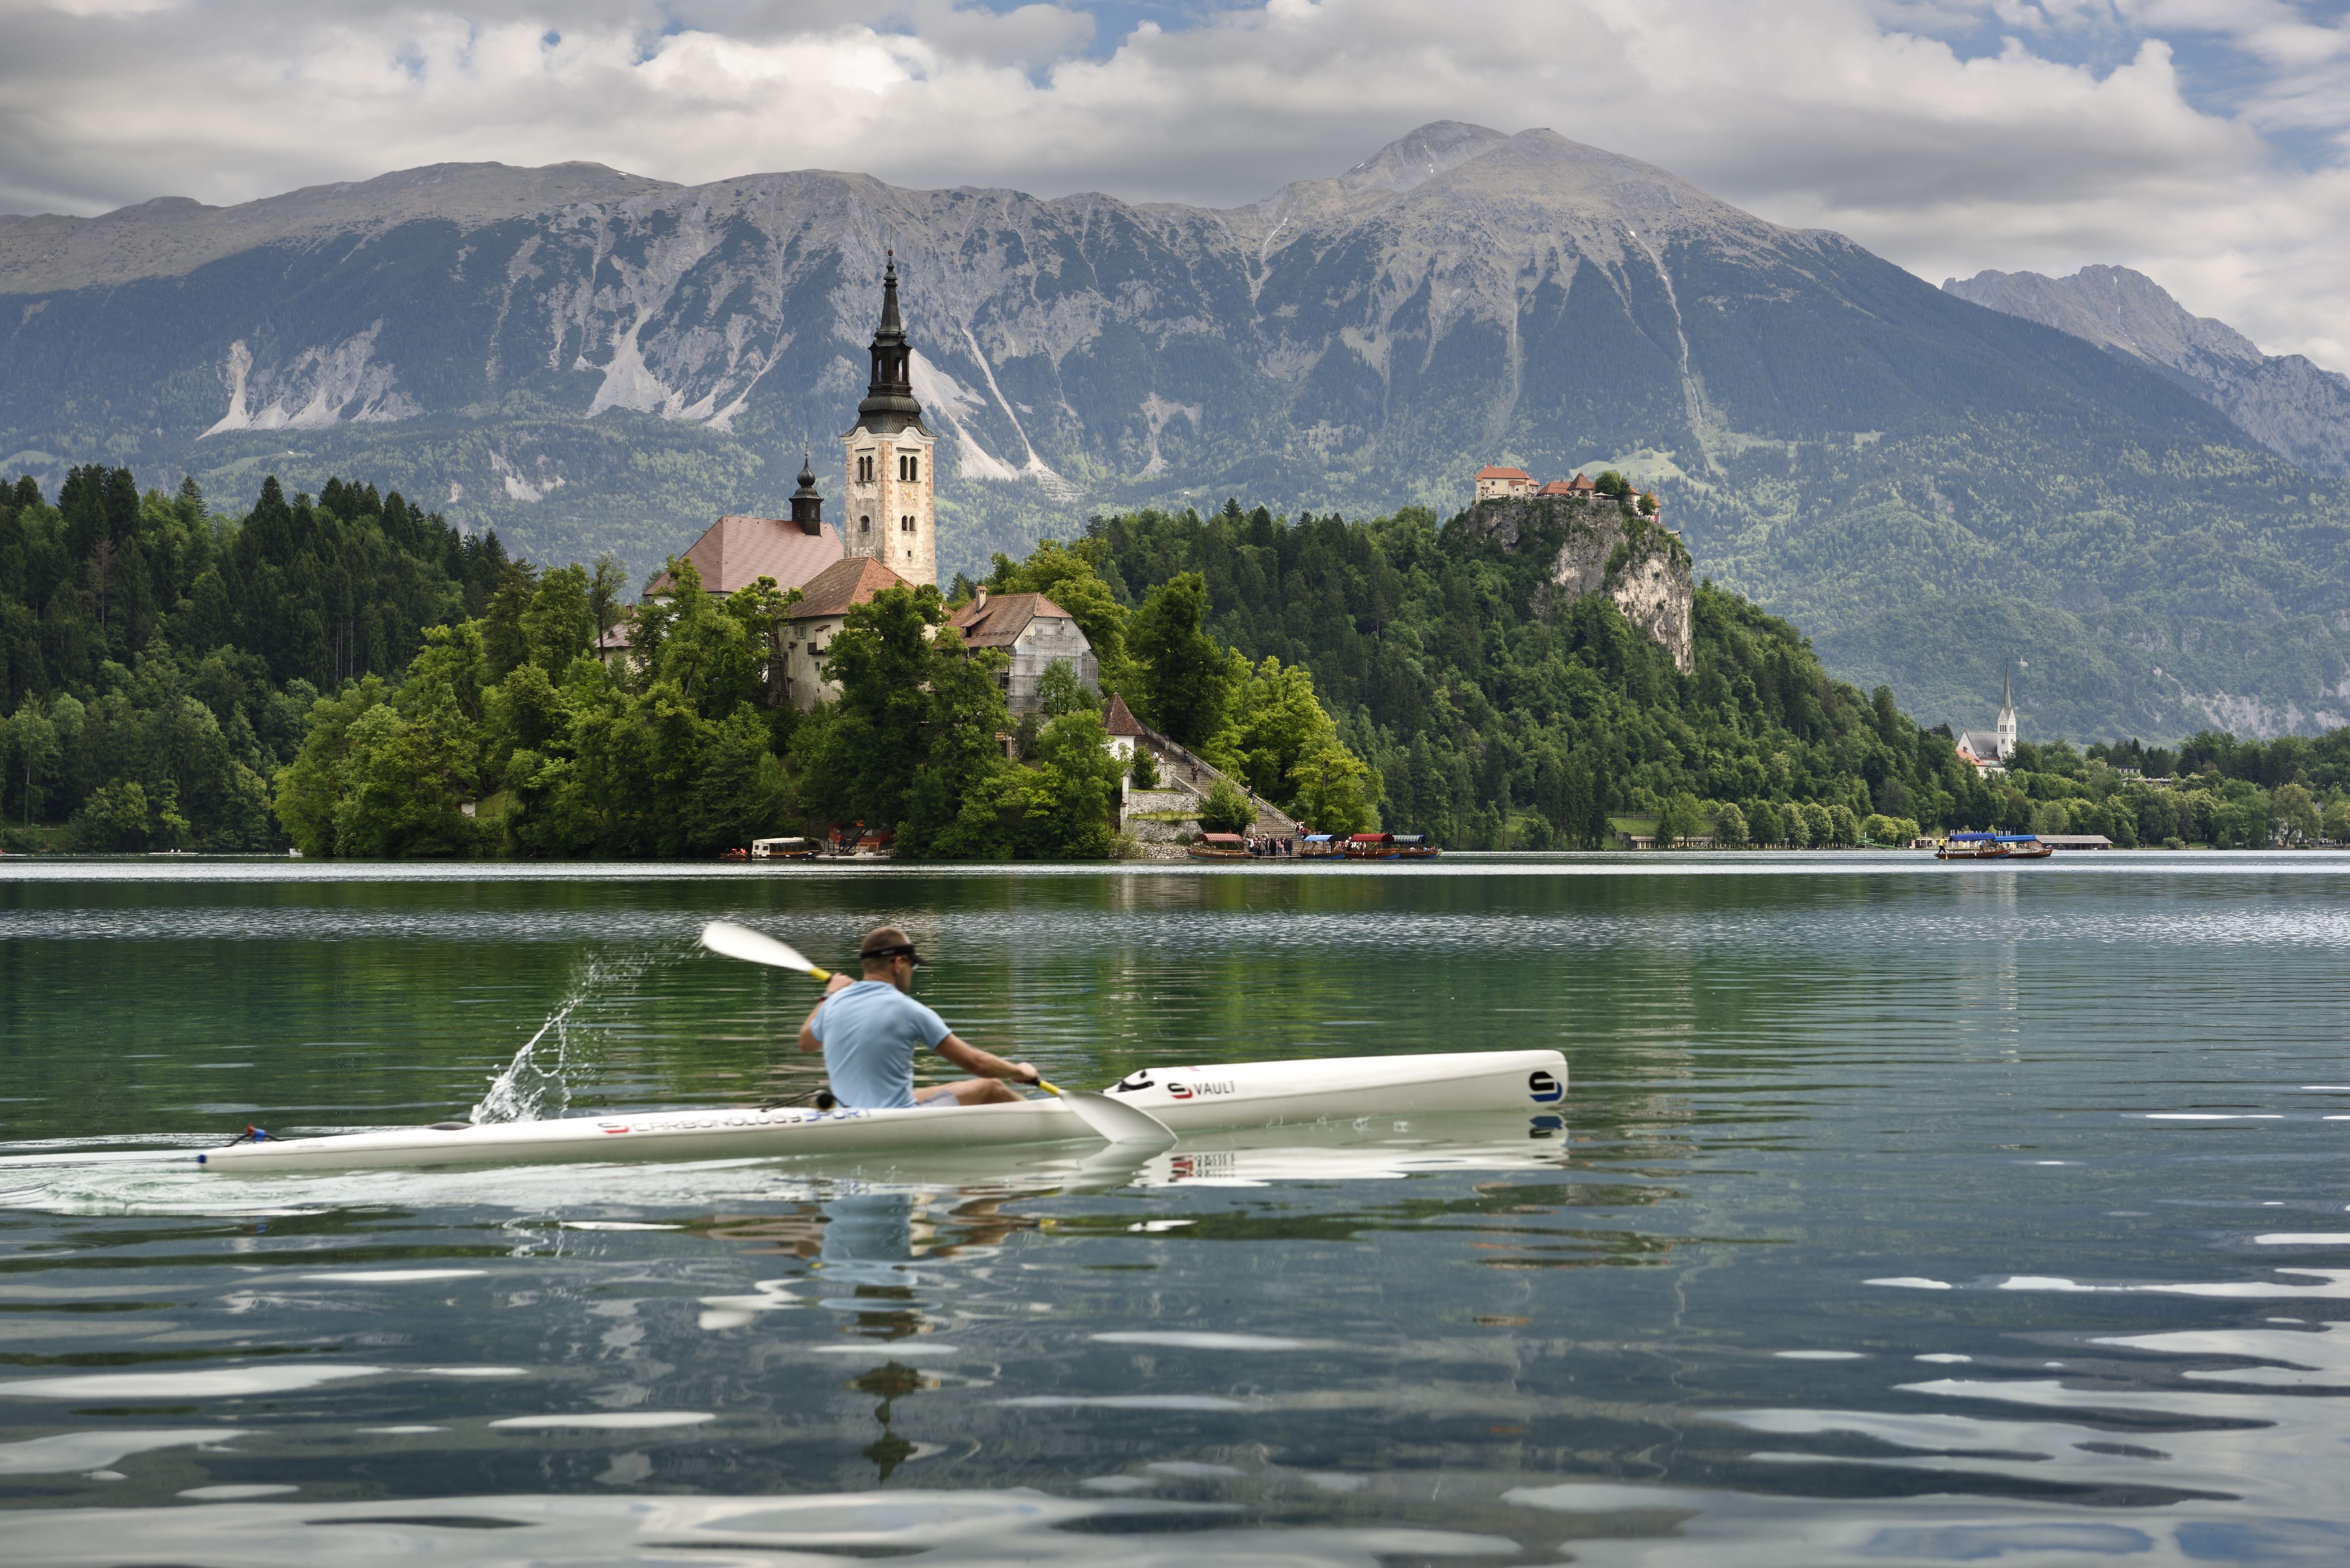 A kayaker on Slovenia's Lake Bled with a castle in the background.